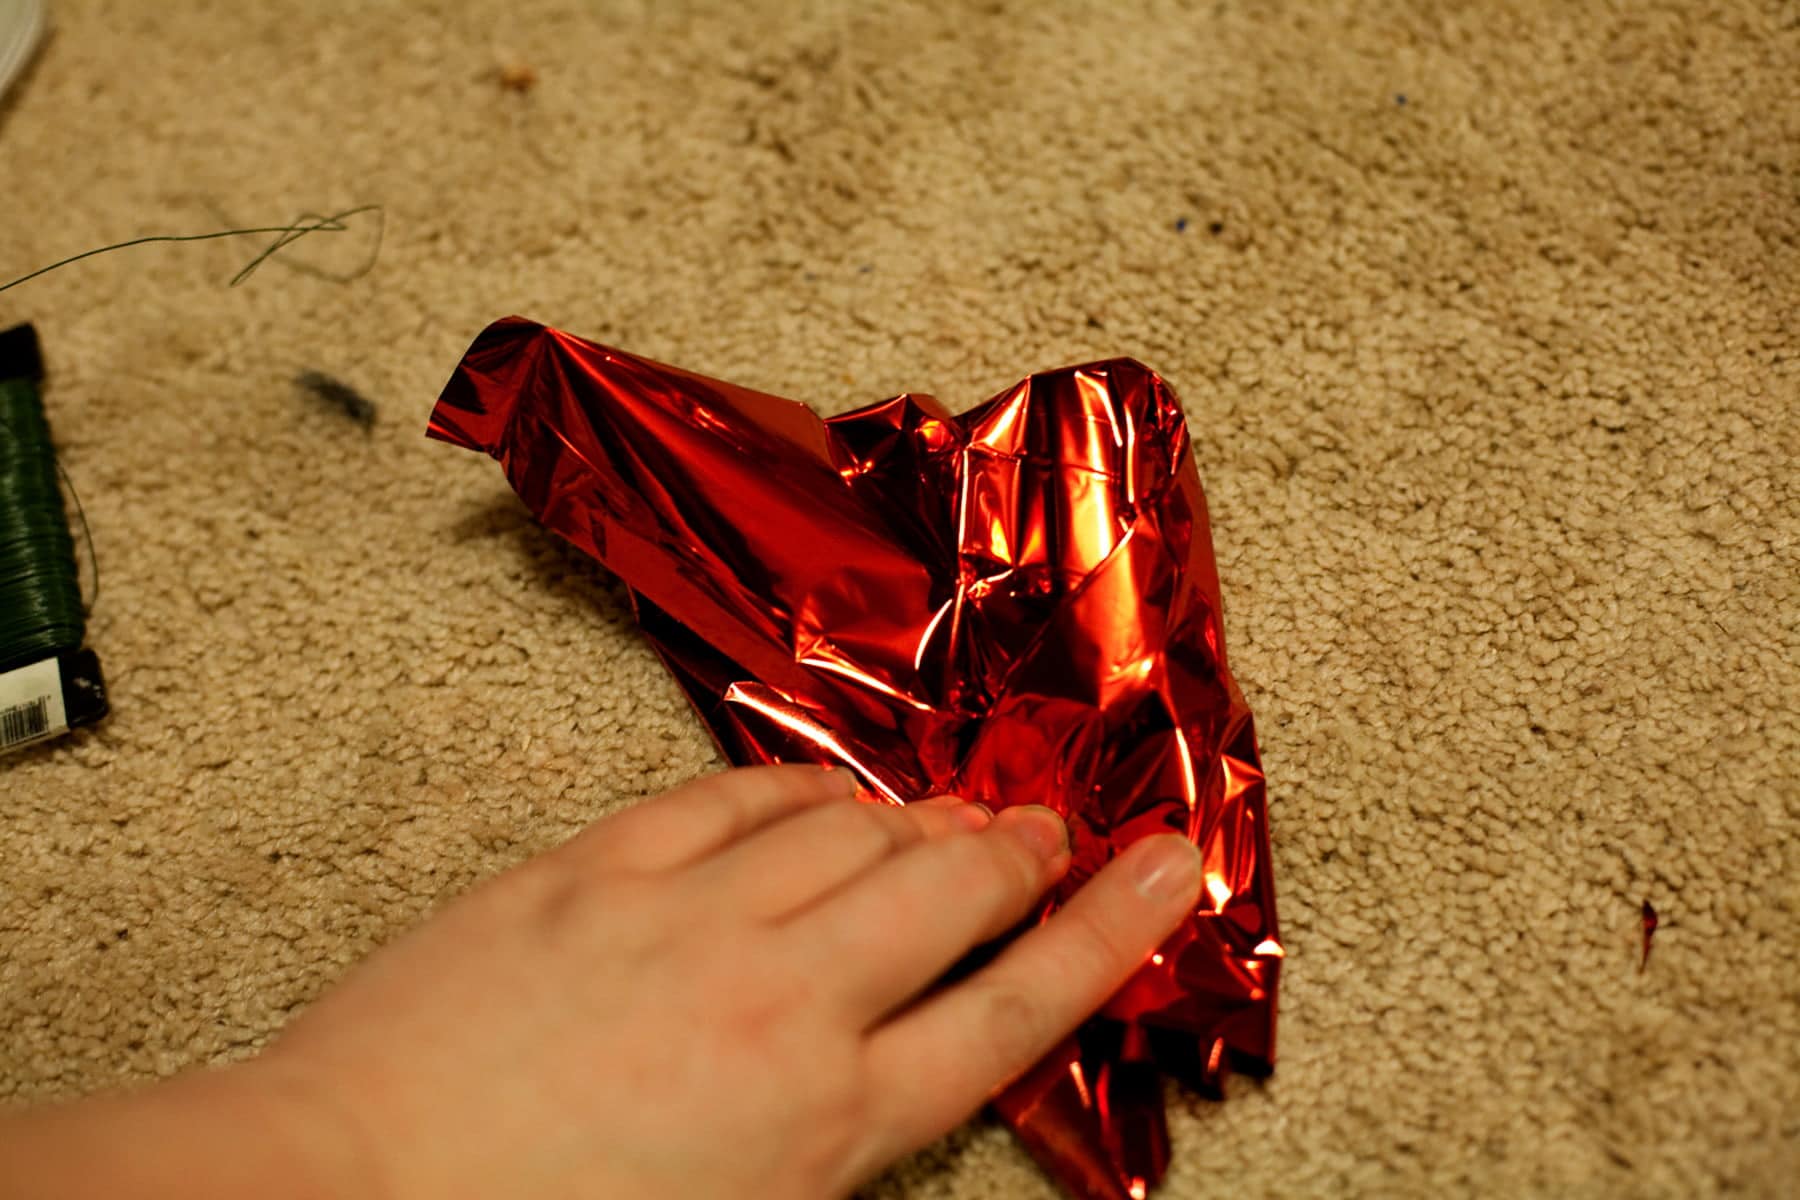 A hand is shown wrapping red mylar tightly around a mini liquor bottle.